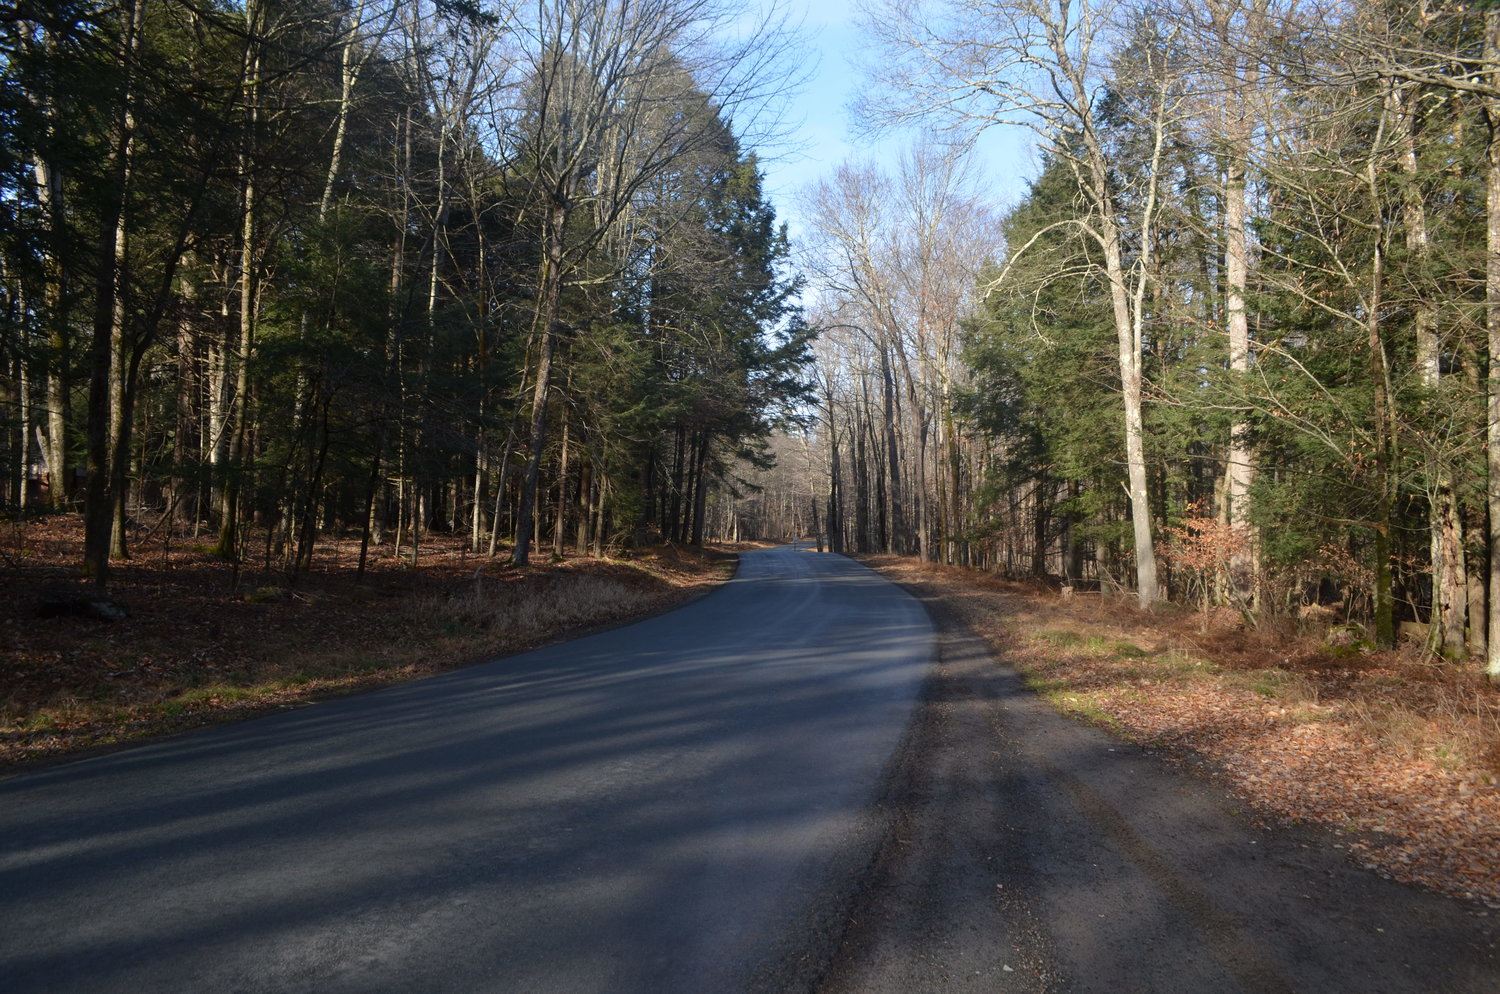 A view of Pine Grove Road, which leads to the proposed entrance of the Beside subdivision.